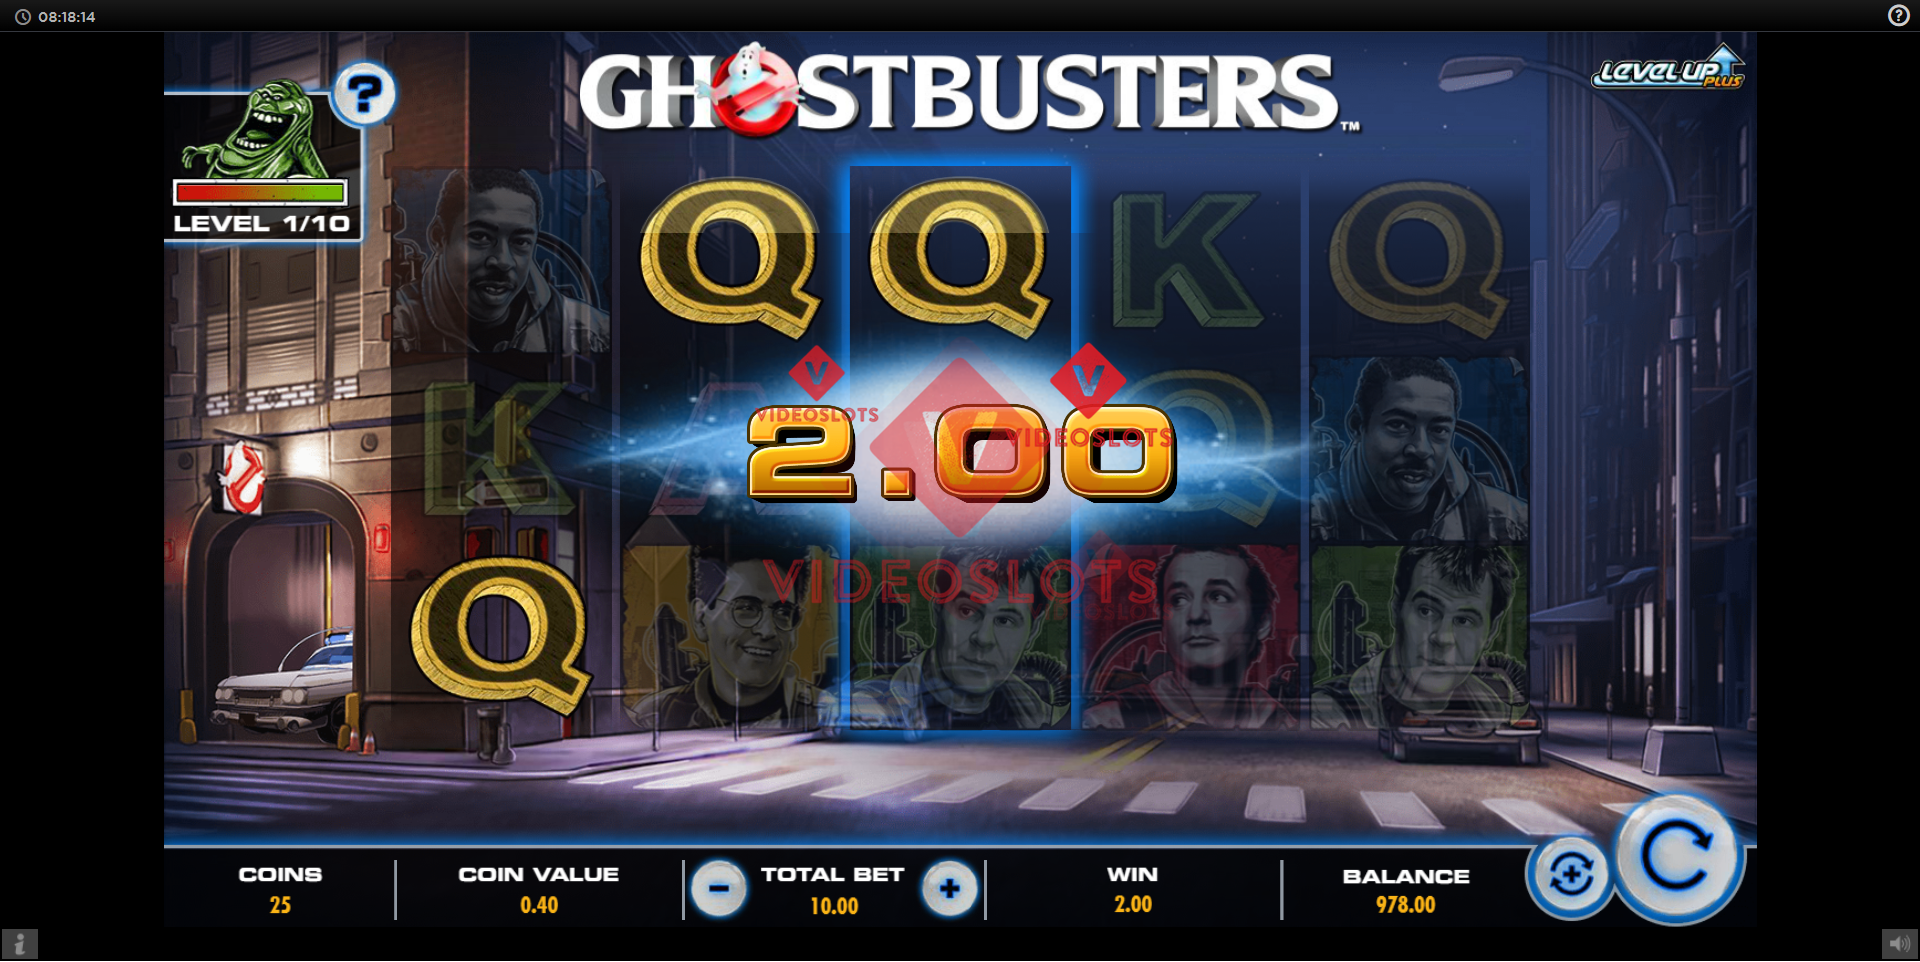 Base Game for Ghostbusters Plus slot from IGT